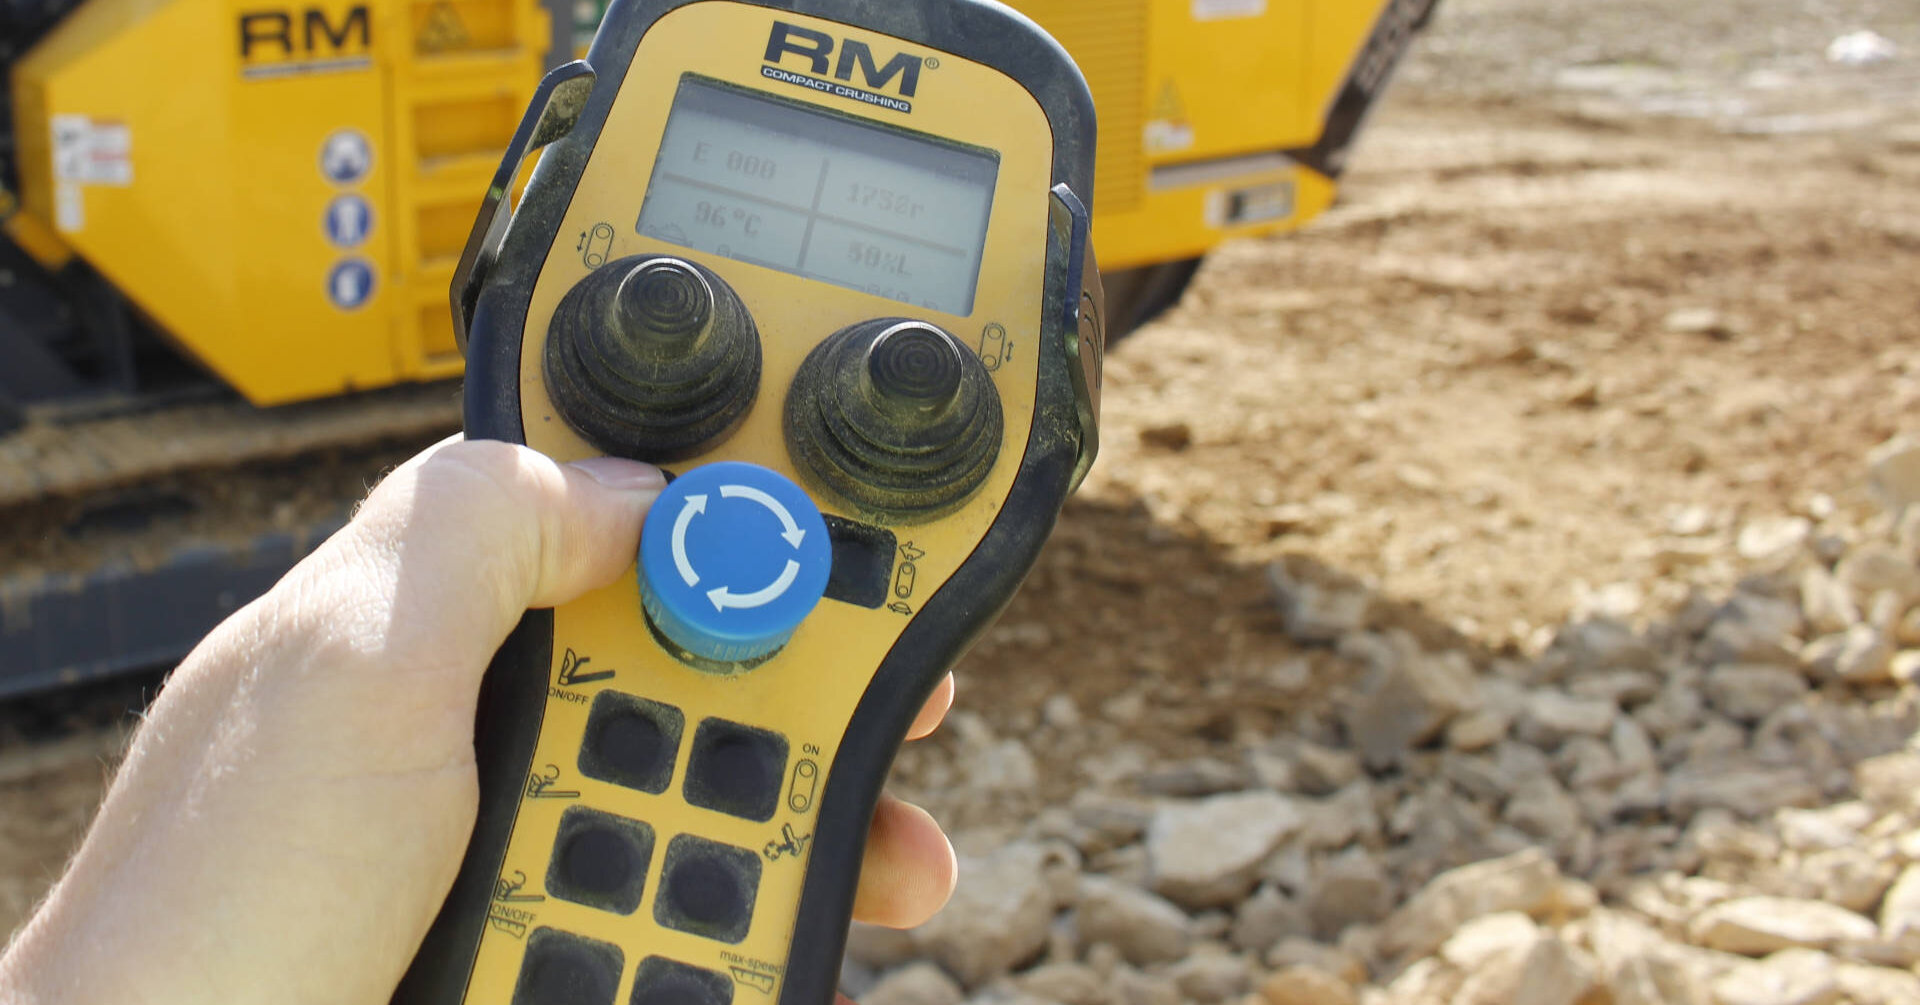 User-friendly controls in portable rock crushers